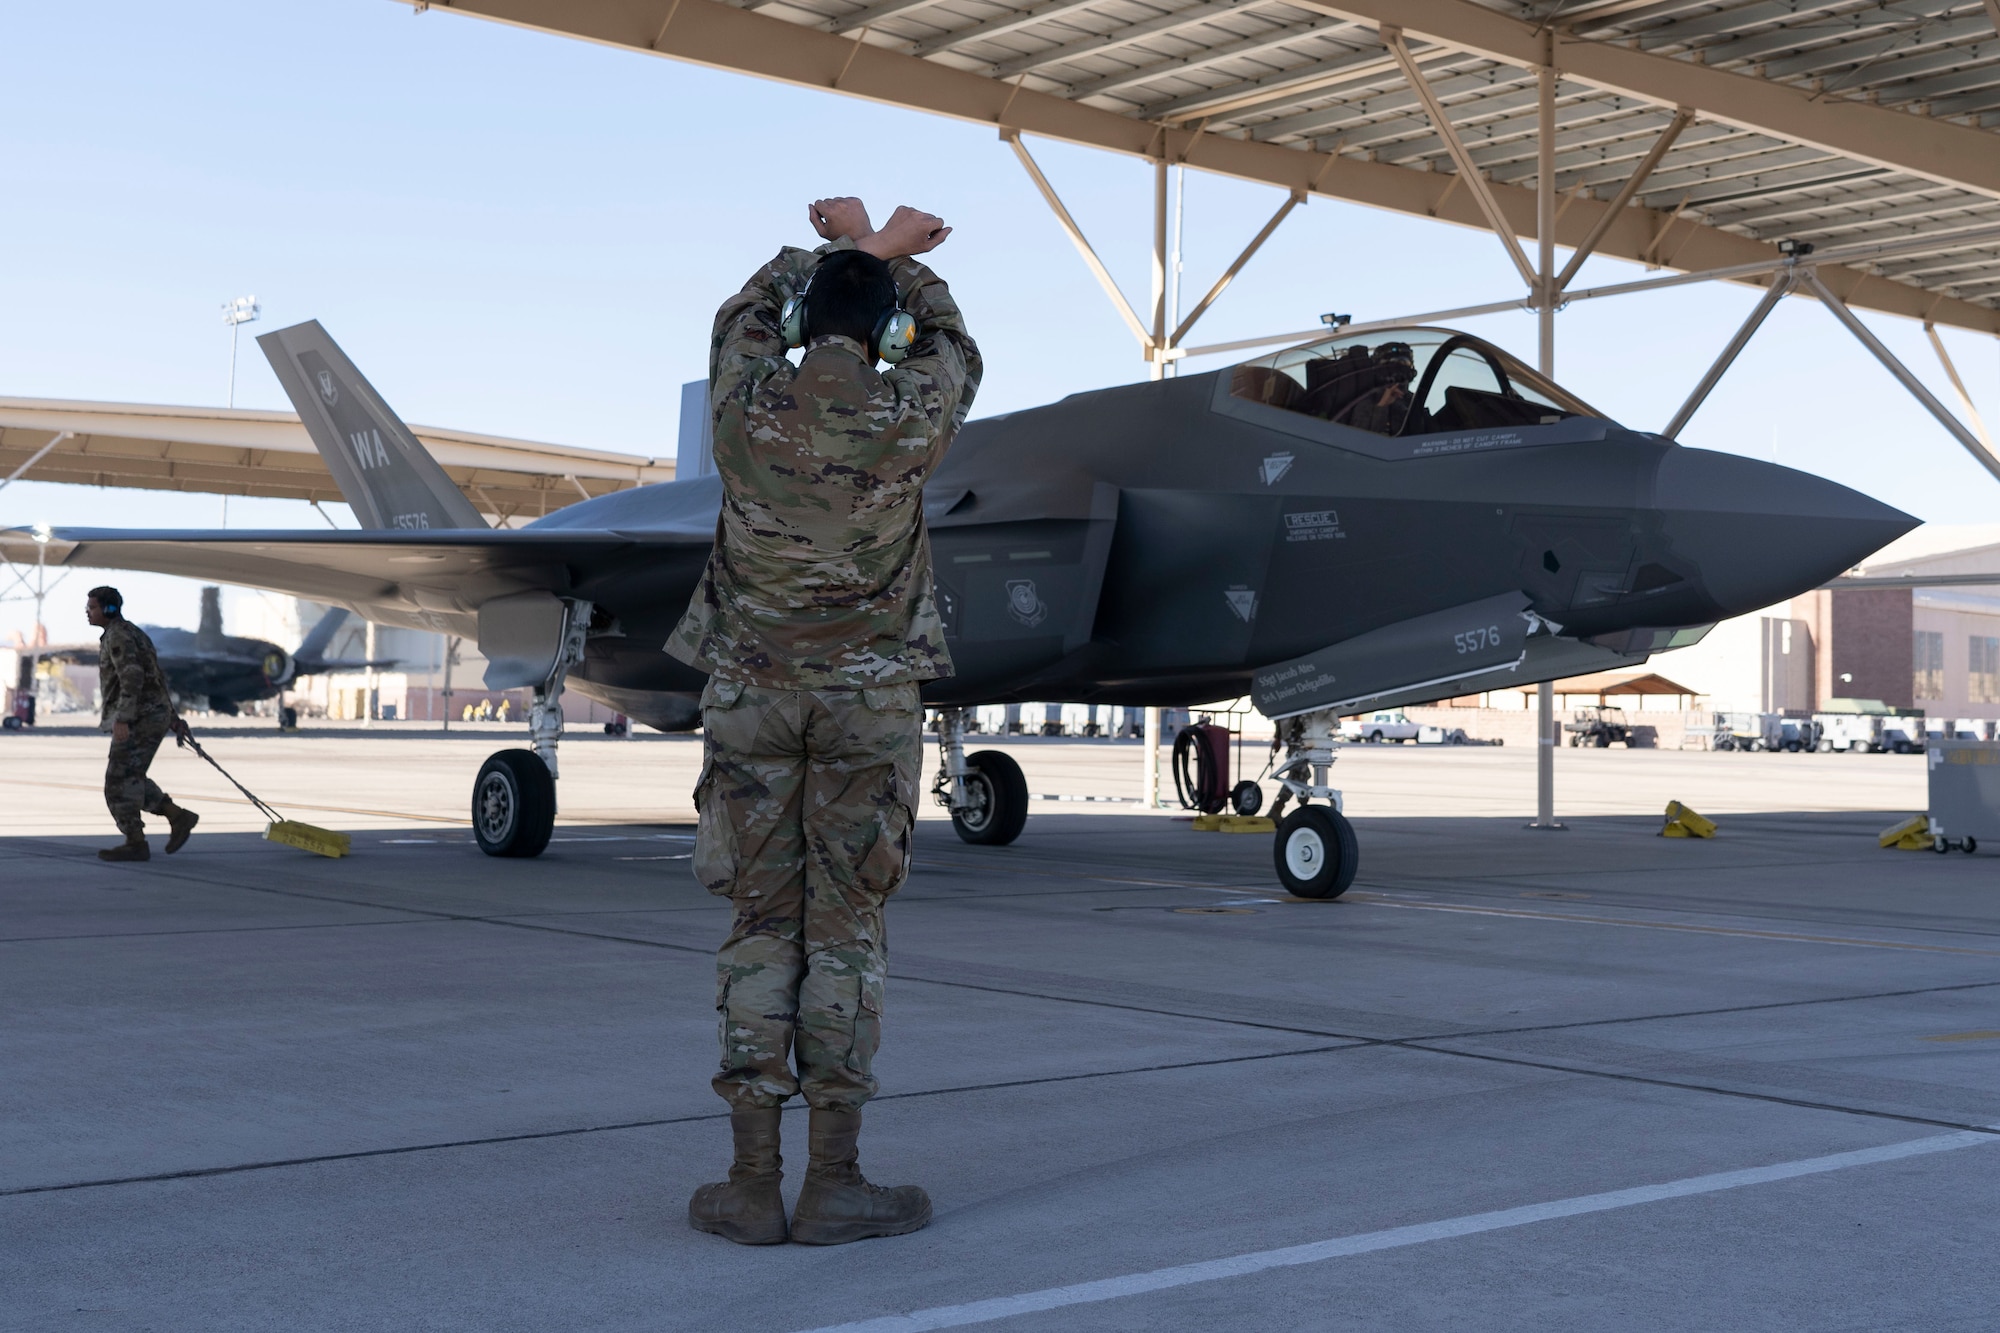 Senior Airman Patrick Bellar, a Lightning Air Maintenance Unit Crew Chief, marshals an F-35A Lightning II piloted by Brig. Gen. Michael Rawls, Air Force Operational Test and Evaluation Center commander prior to taxiing at Nellis Air Force Base, Nevada, Jan. 12, 2023. Having the AFOTEC commander flying with the 65th Aggressors is a unique and opportunistic relationship where he can directly see the effects of his organization on warfighter training. (U.S. Air Force Photo by Airman First Class Trevor Bell)